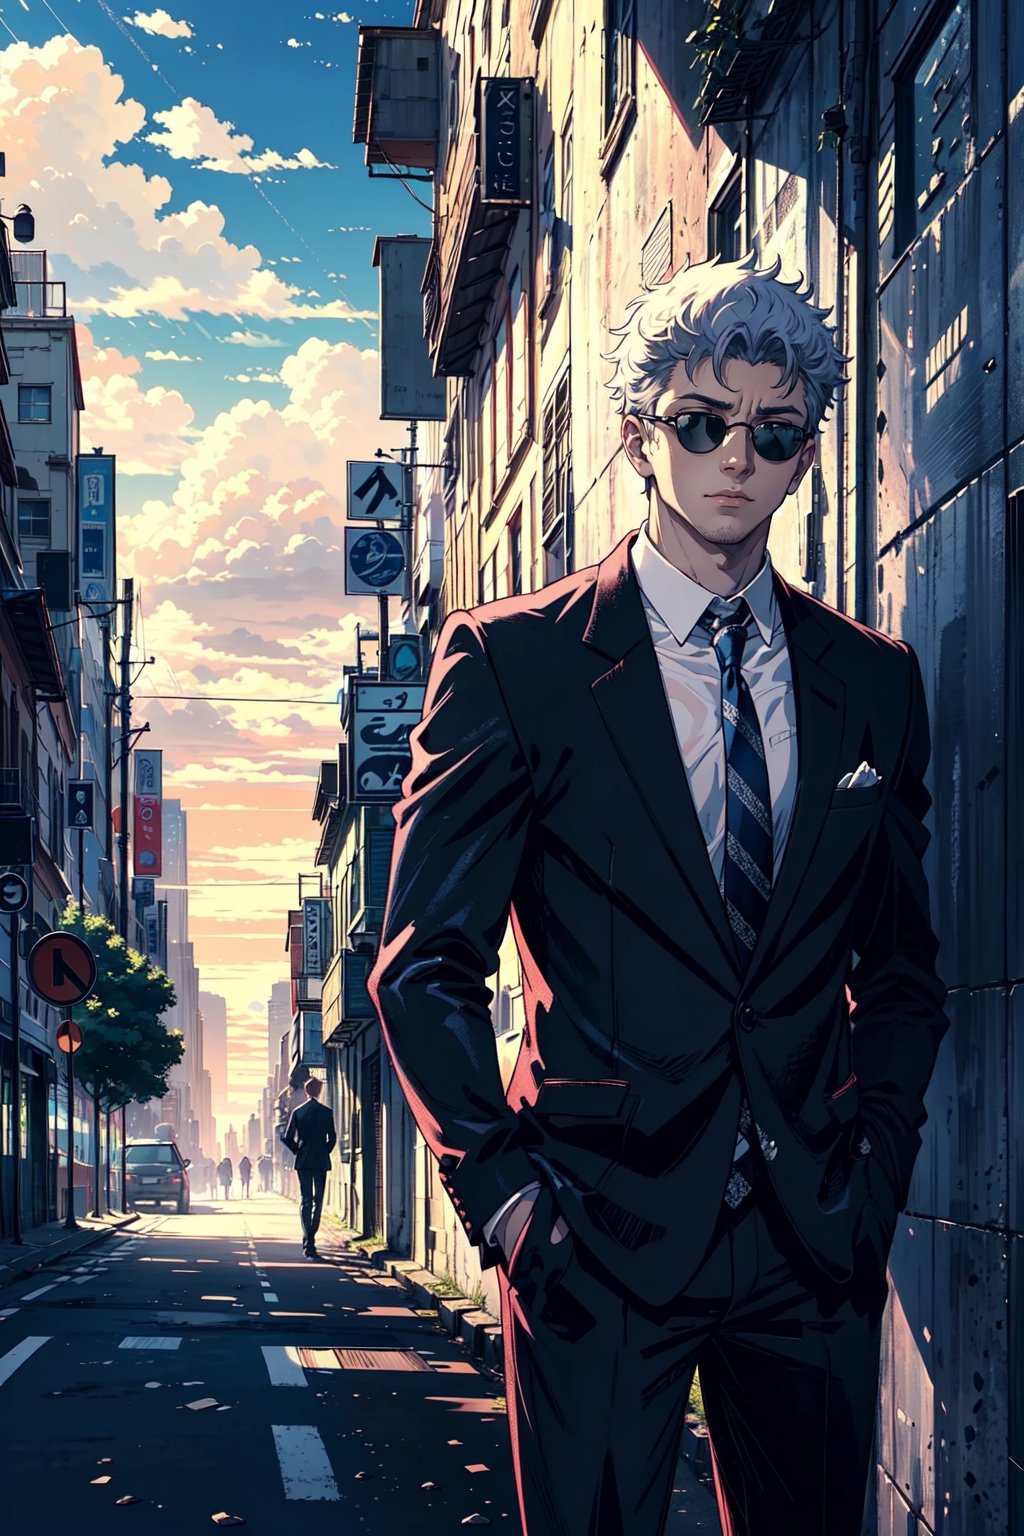 man mature, Hands in the pocket, in the background a city, car,SUN, work of art, wallpaper, soft shading, suit without tie, pastelbg, sunglasses